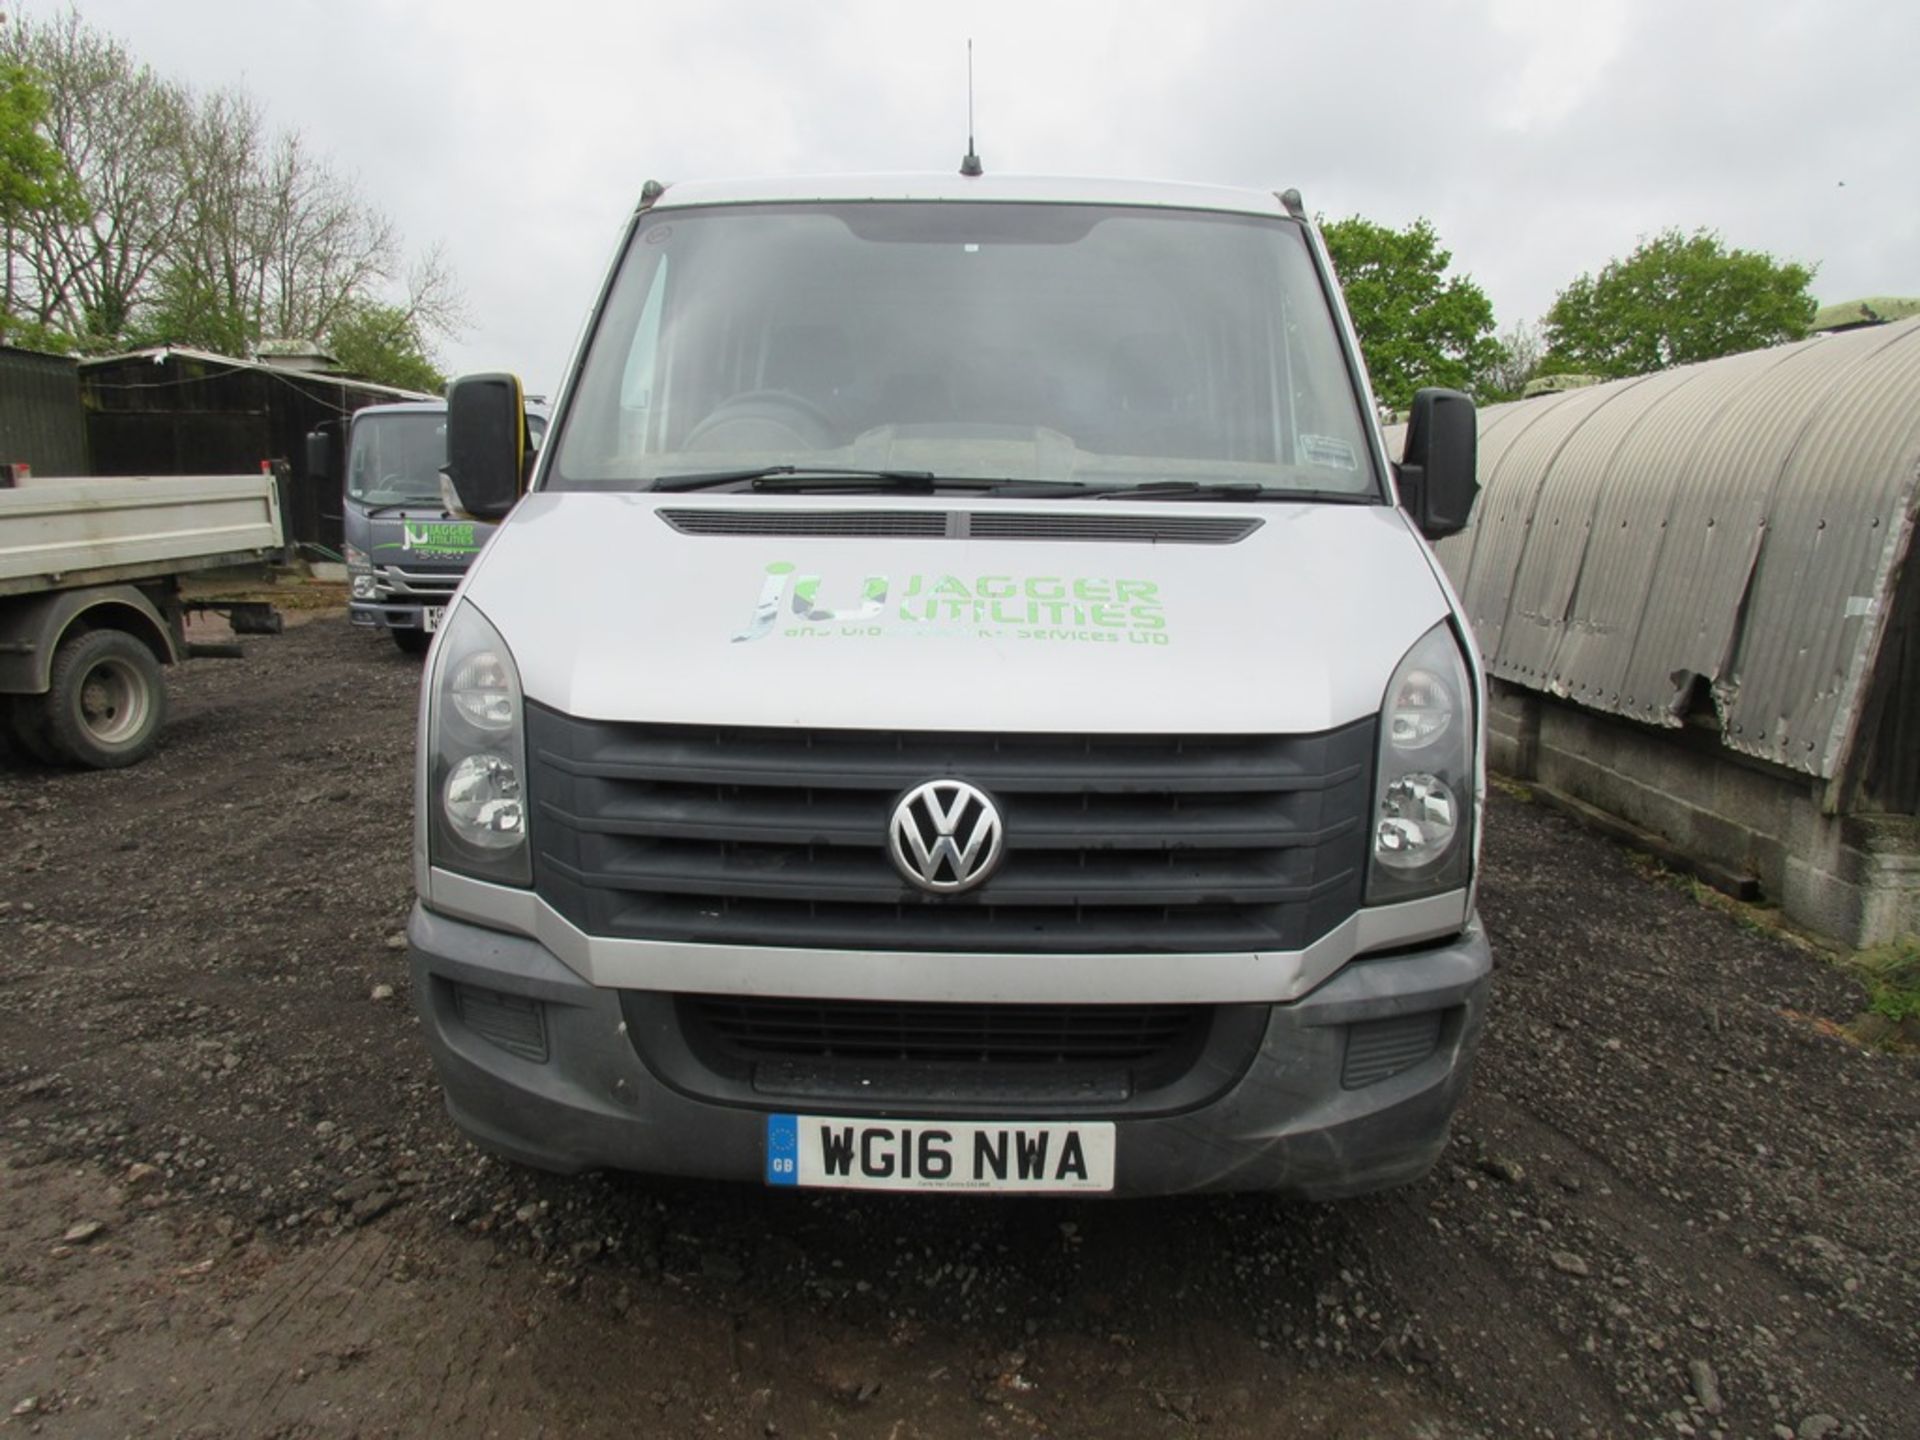 Volkswagen Crafter CR35 2.0 TDI Double Cab Tipper, 134bhp (29/04/2016) - Image 3 of 18